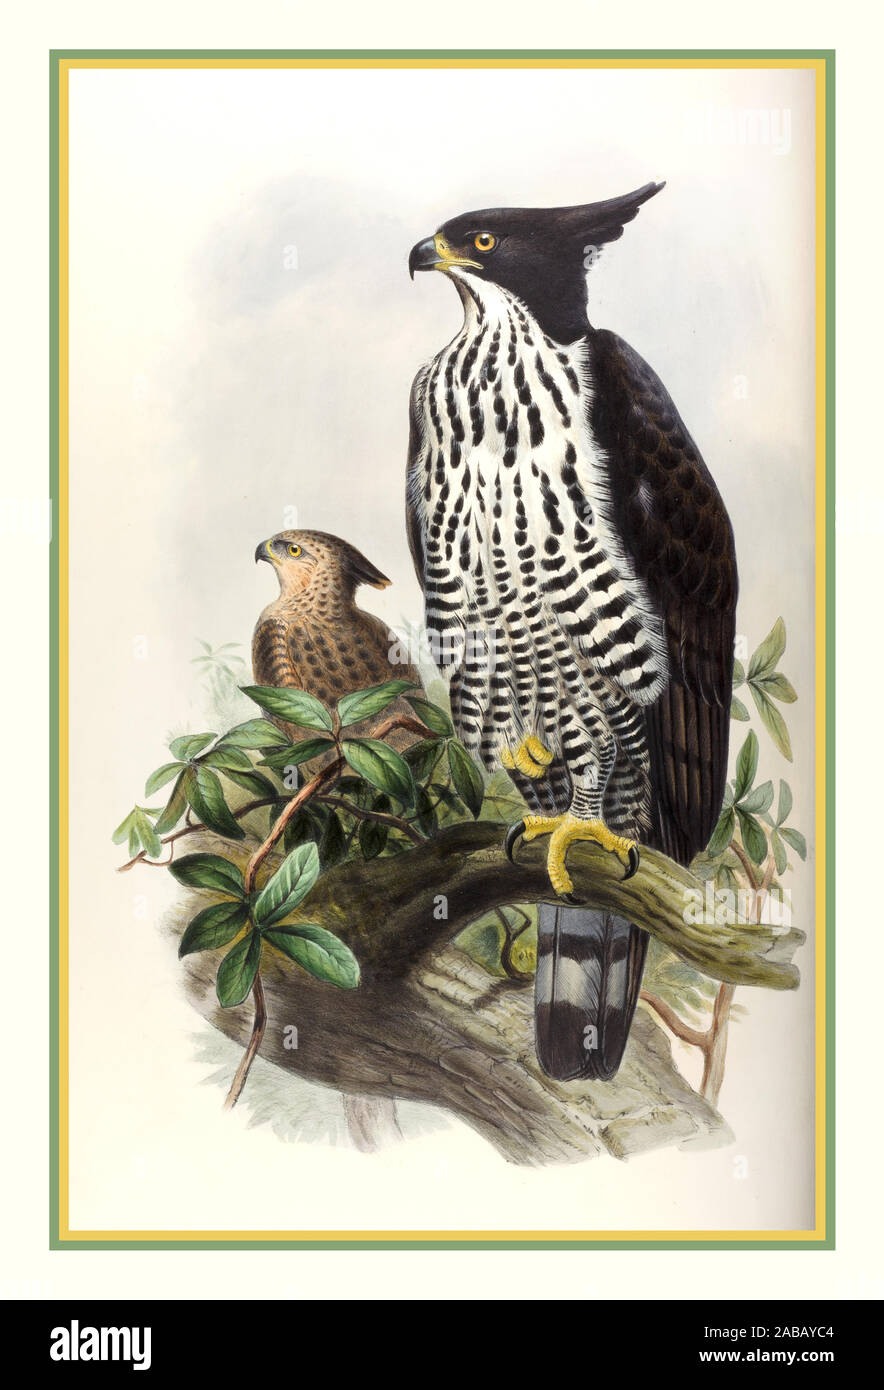 CRESTED EAGLE Vintage 1860’s Spizaetus alboniger Black-and-White Crested Eagle Lithograph Illustration  John Gould. Artist Author The birds of Asia. London : Printed by Taylor and Francis : Published by the author, 1850-1883. Stock Photo